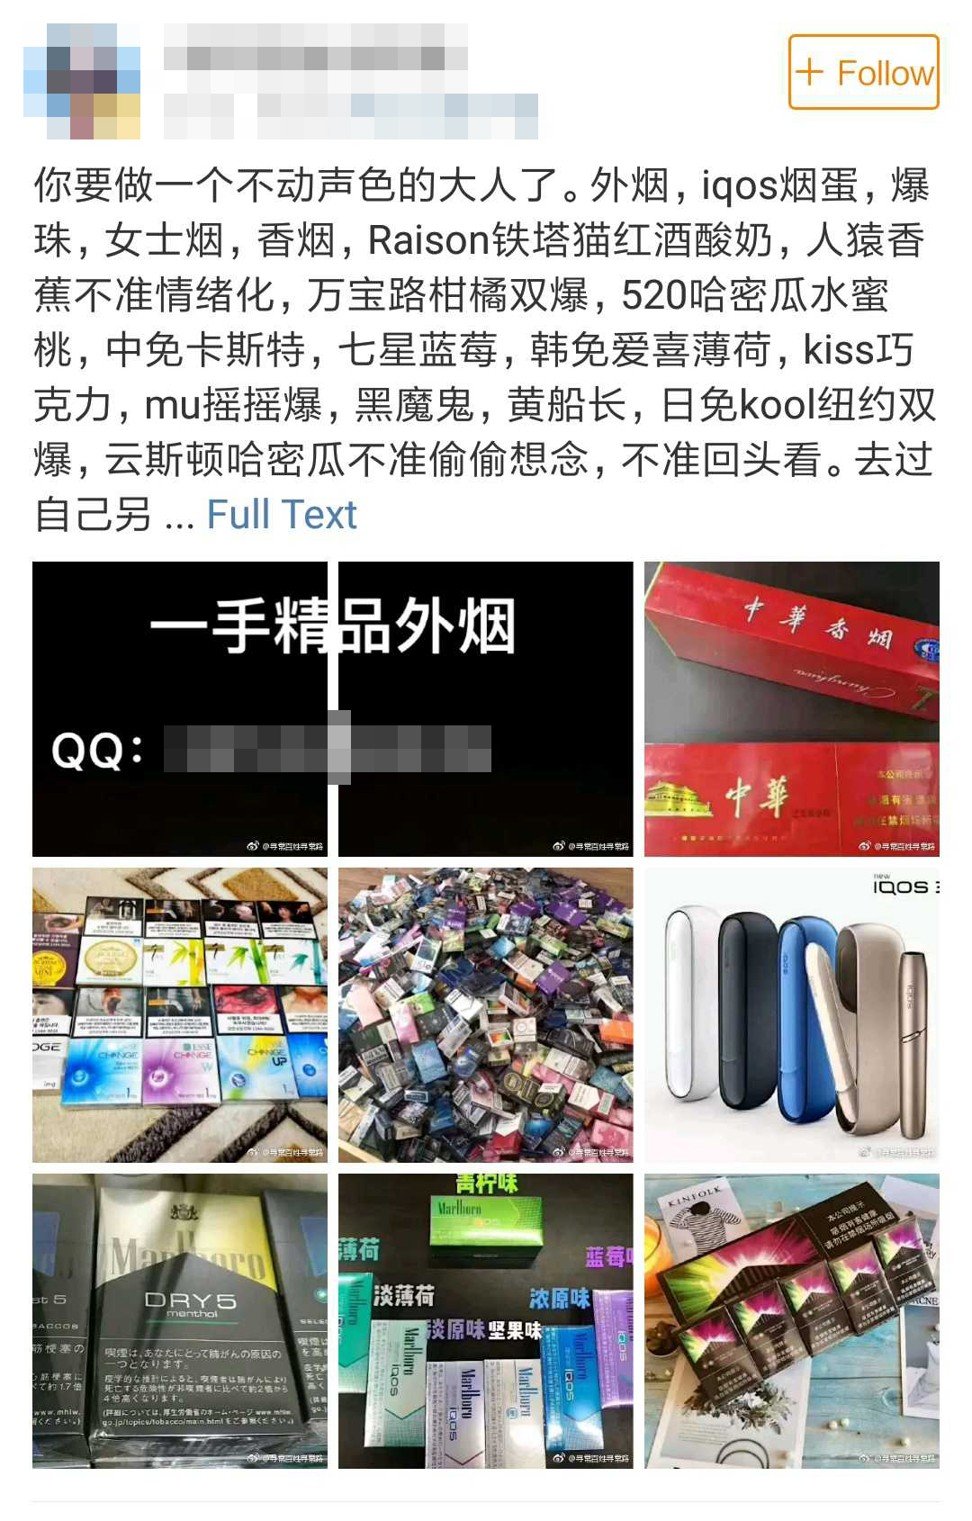 Imported cigarettes on sale on Weibo. Photo: Handout